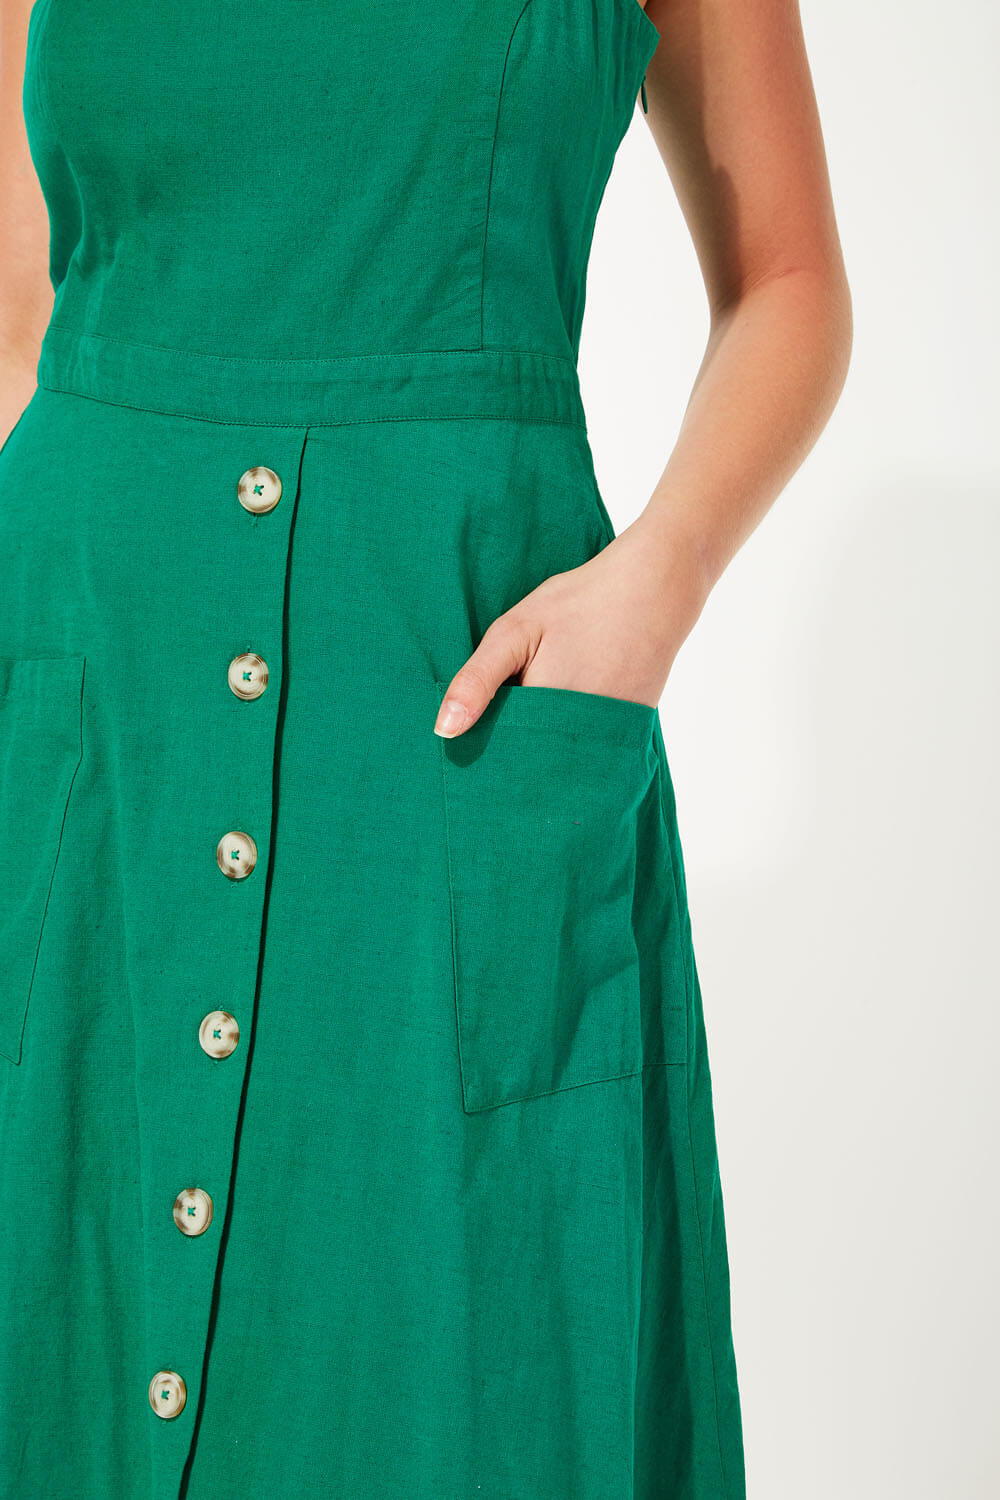 Green Fit and Flare Button Dress, Image 4 of 5